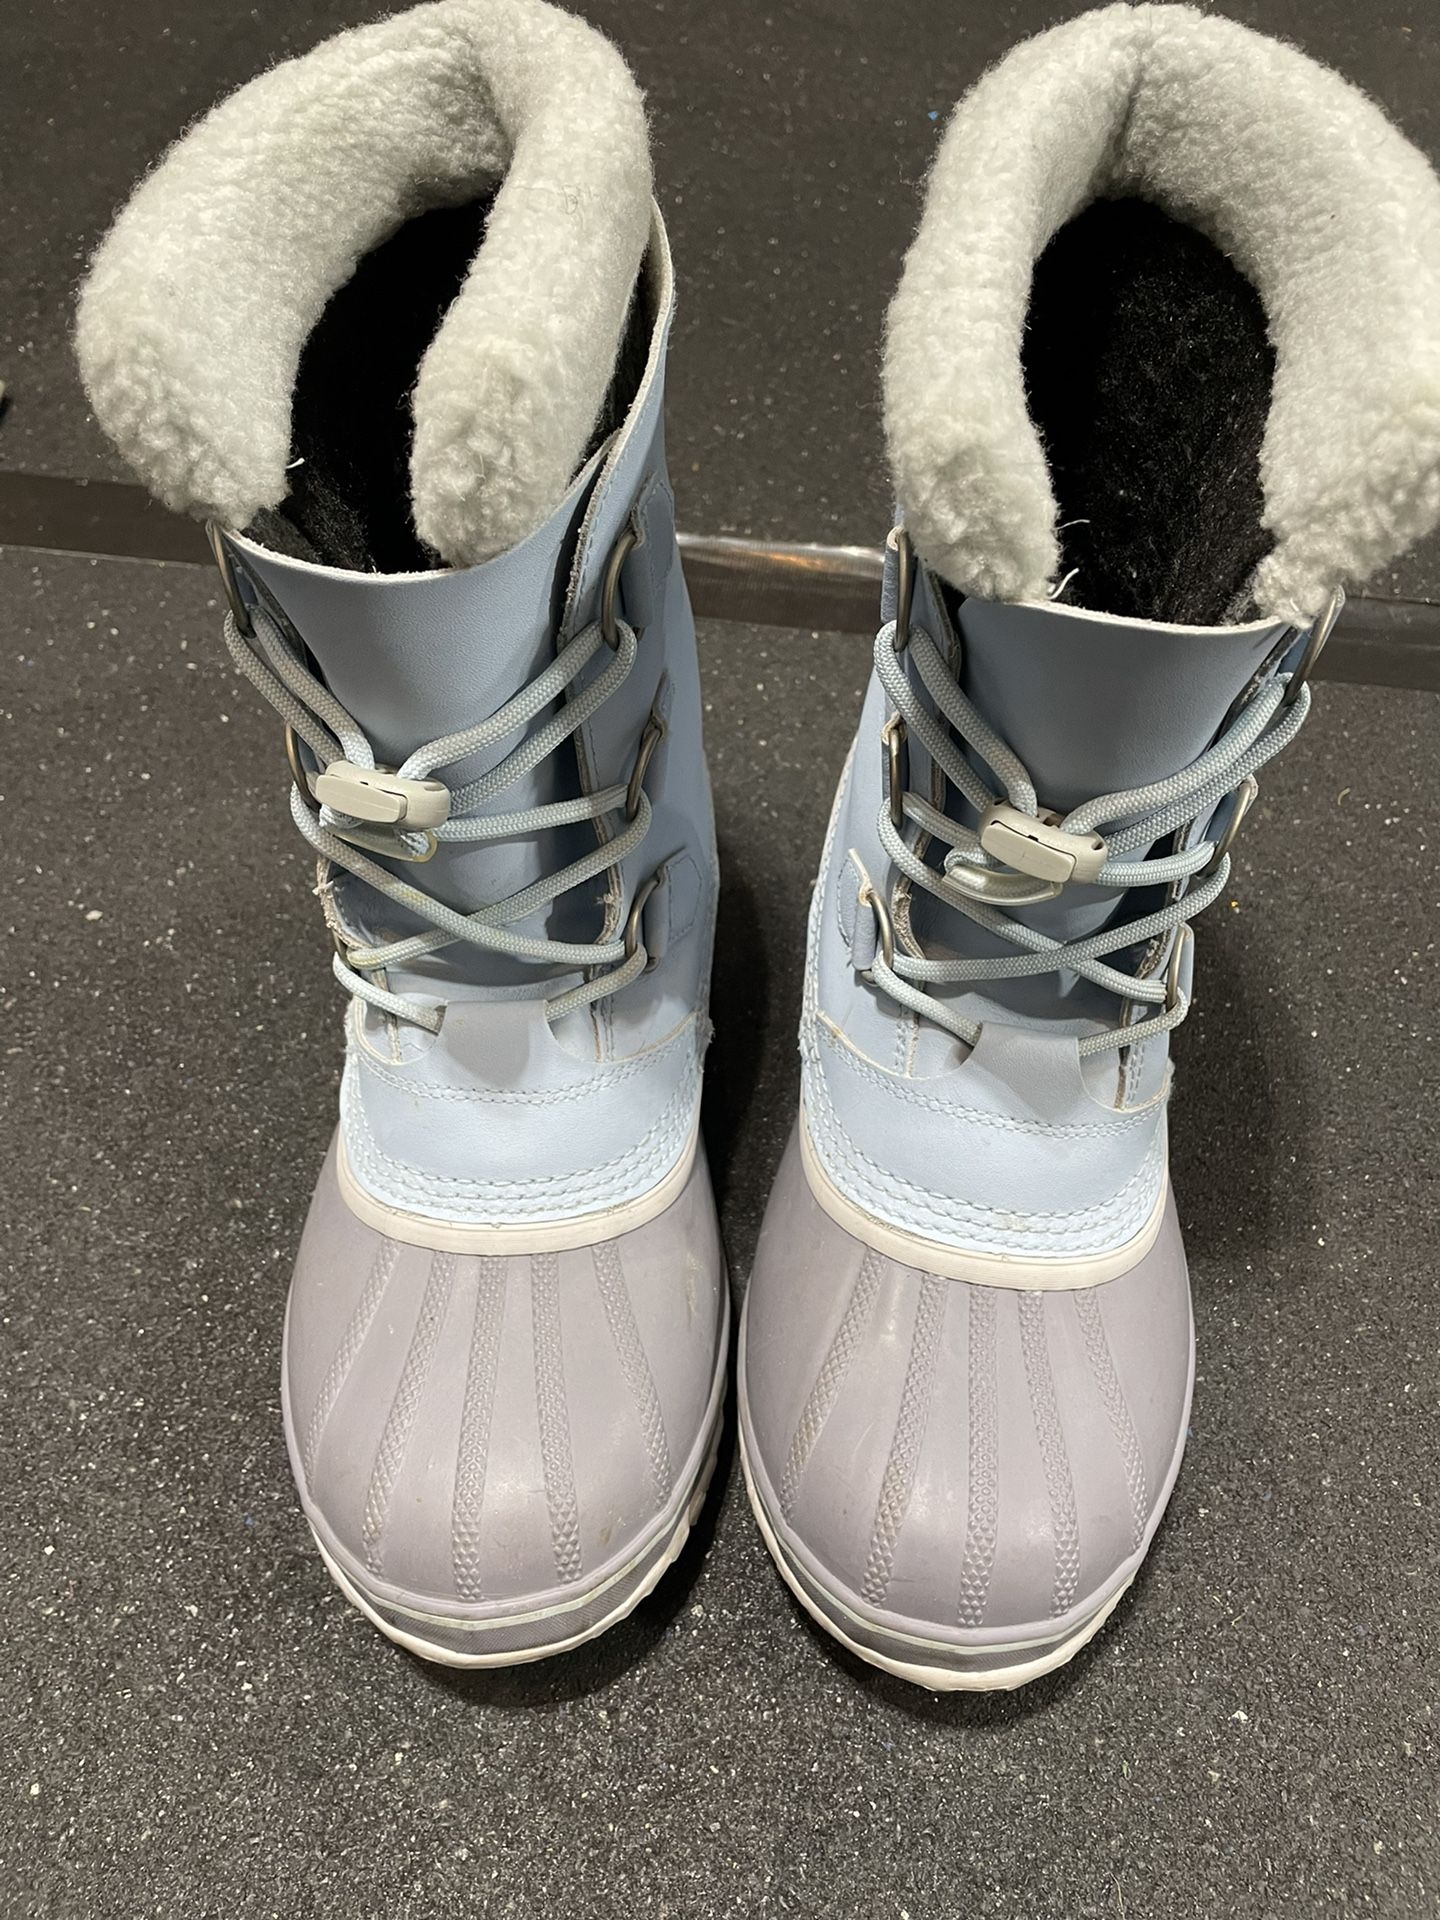 Sorel Boots, Womens Size 7